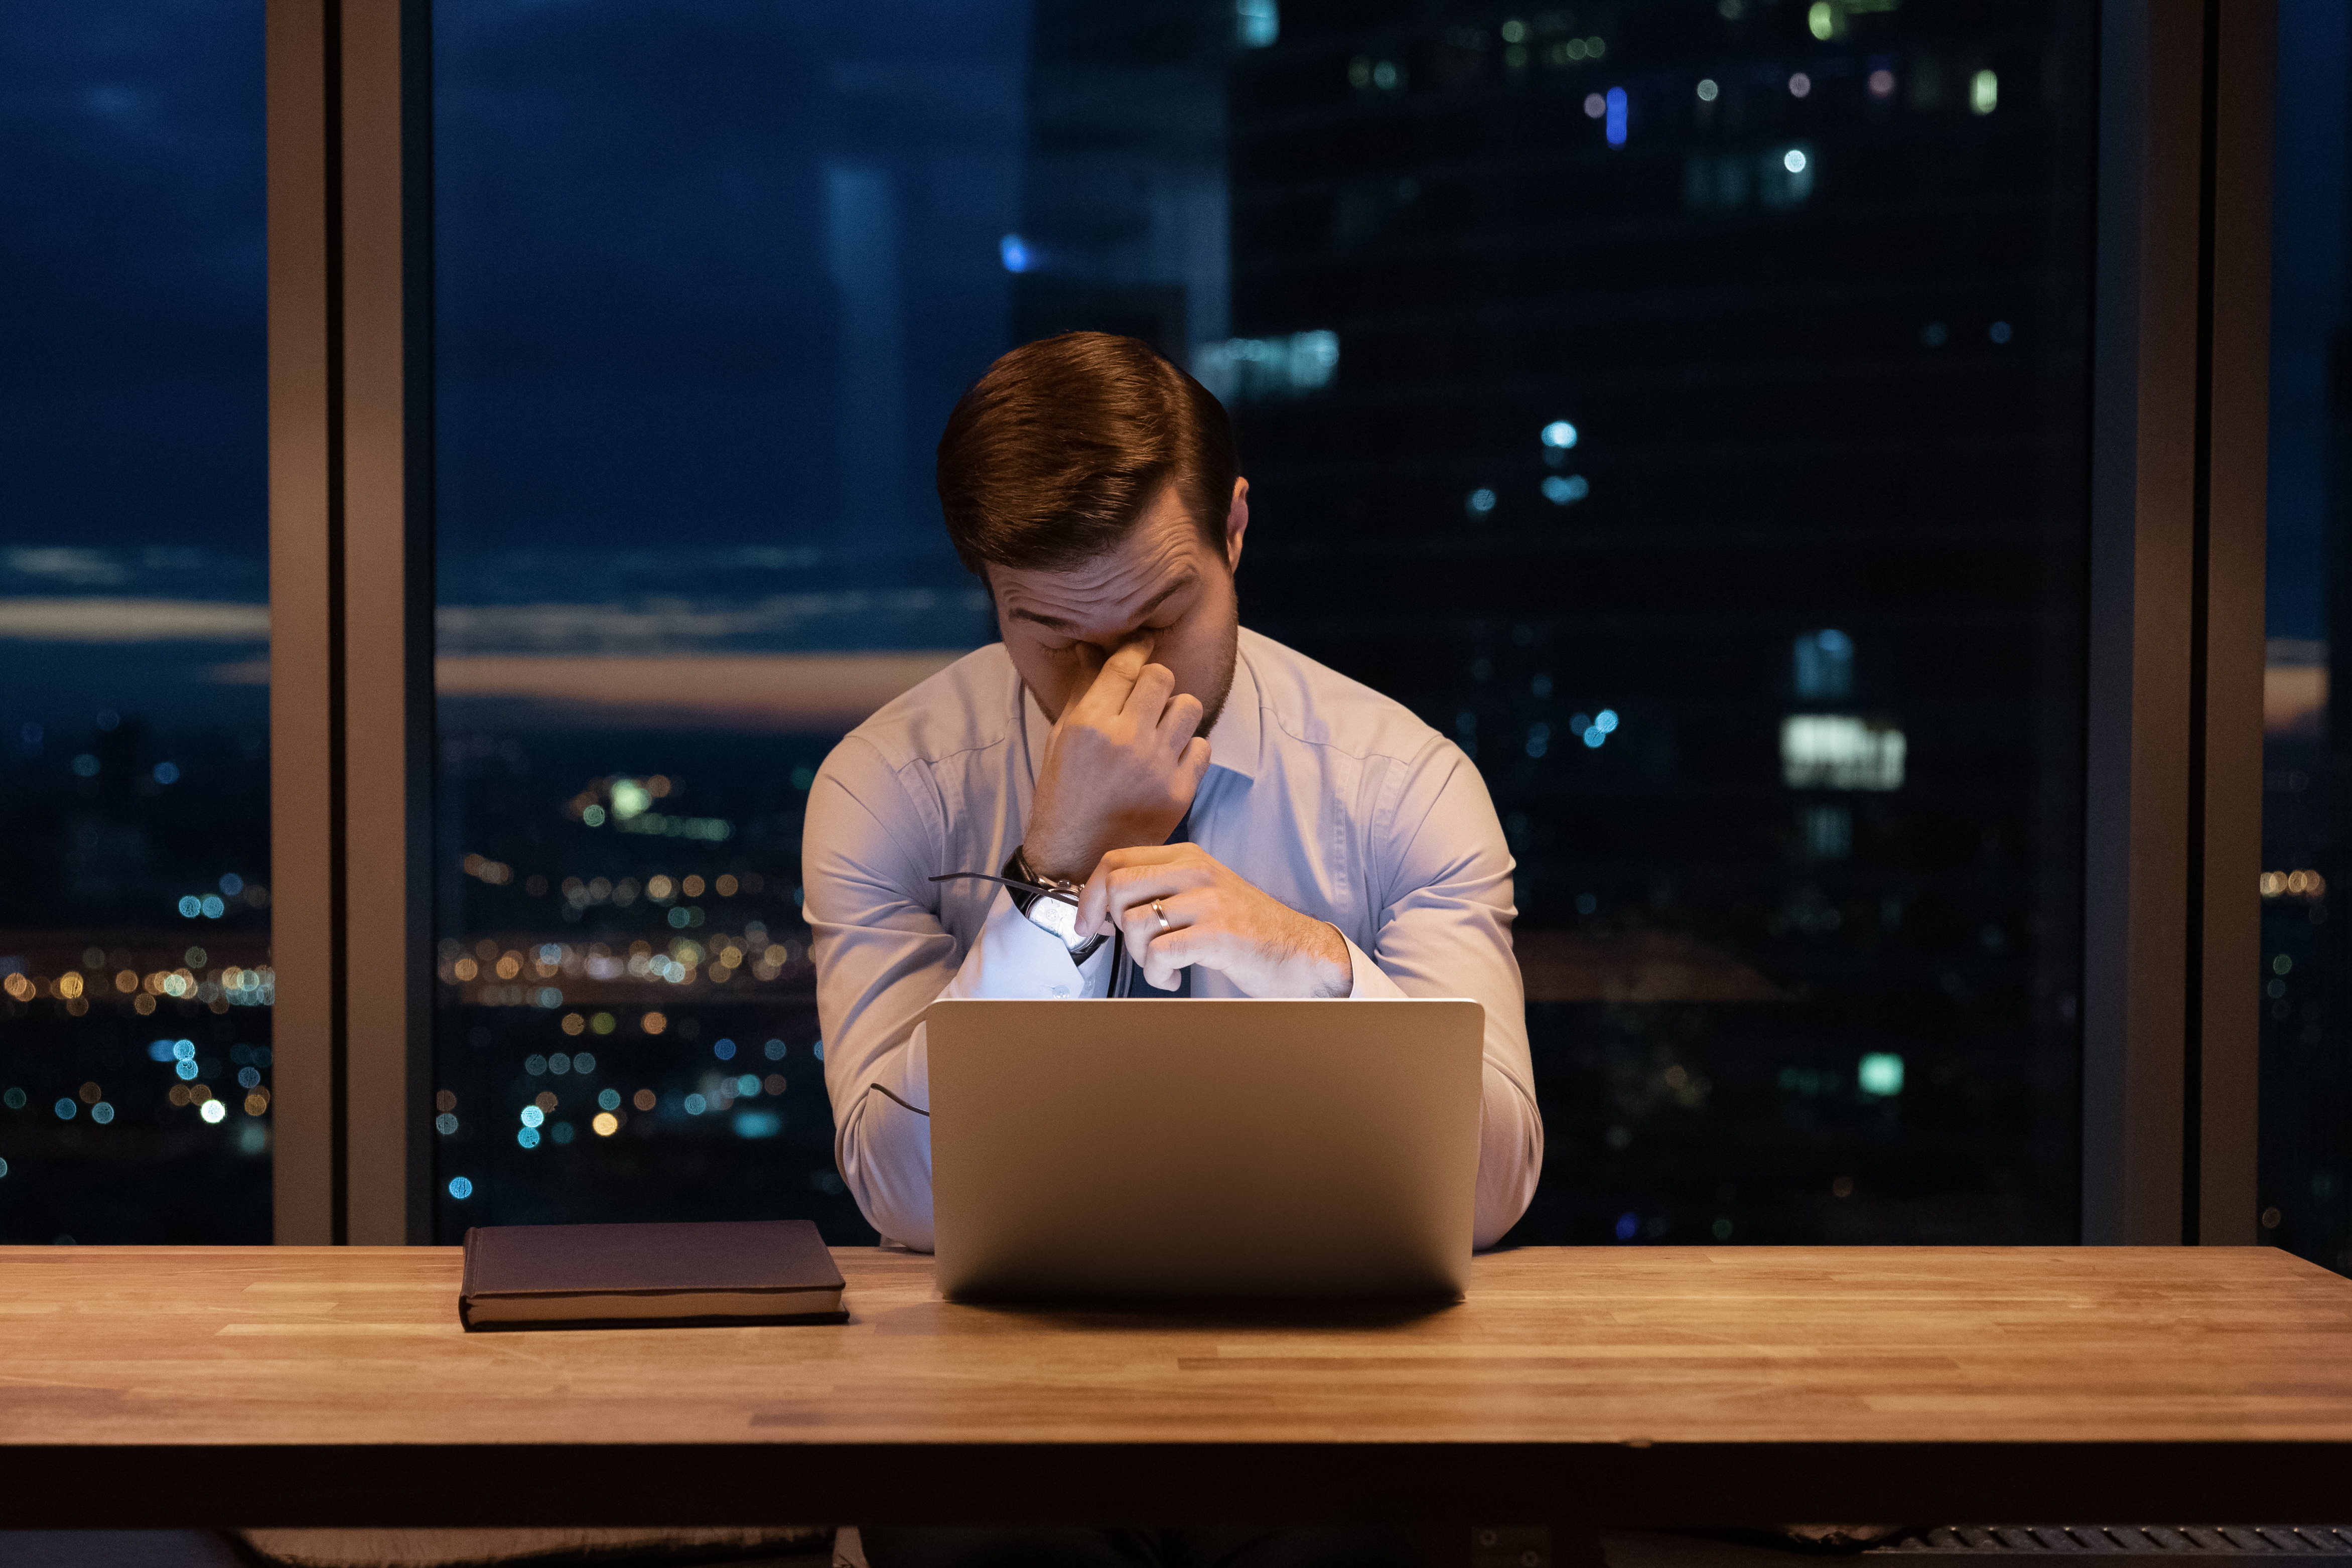 A stressed man working at night | Source: Shutterstock